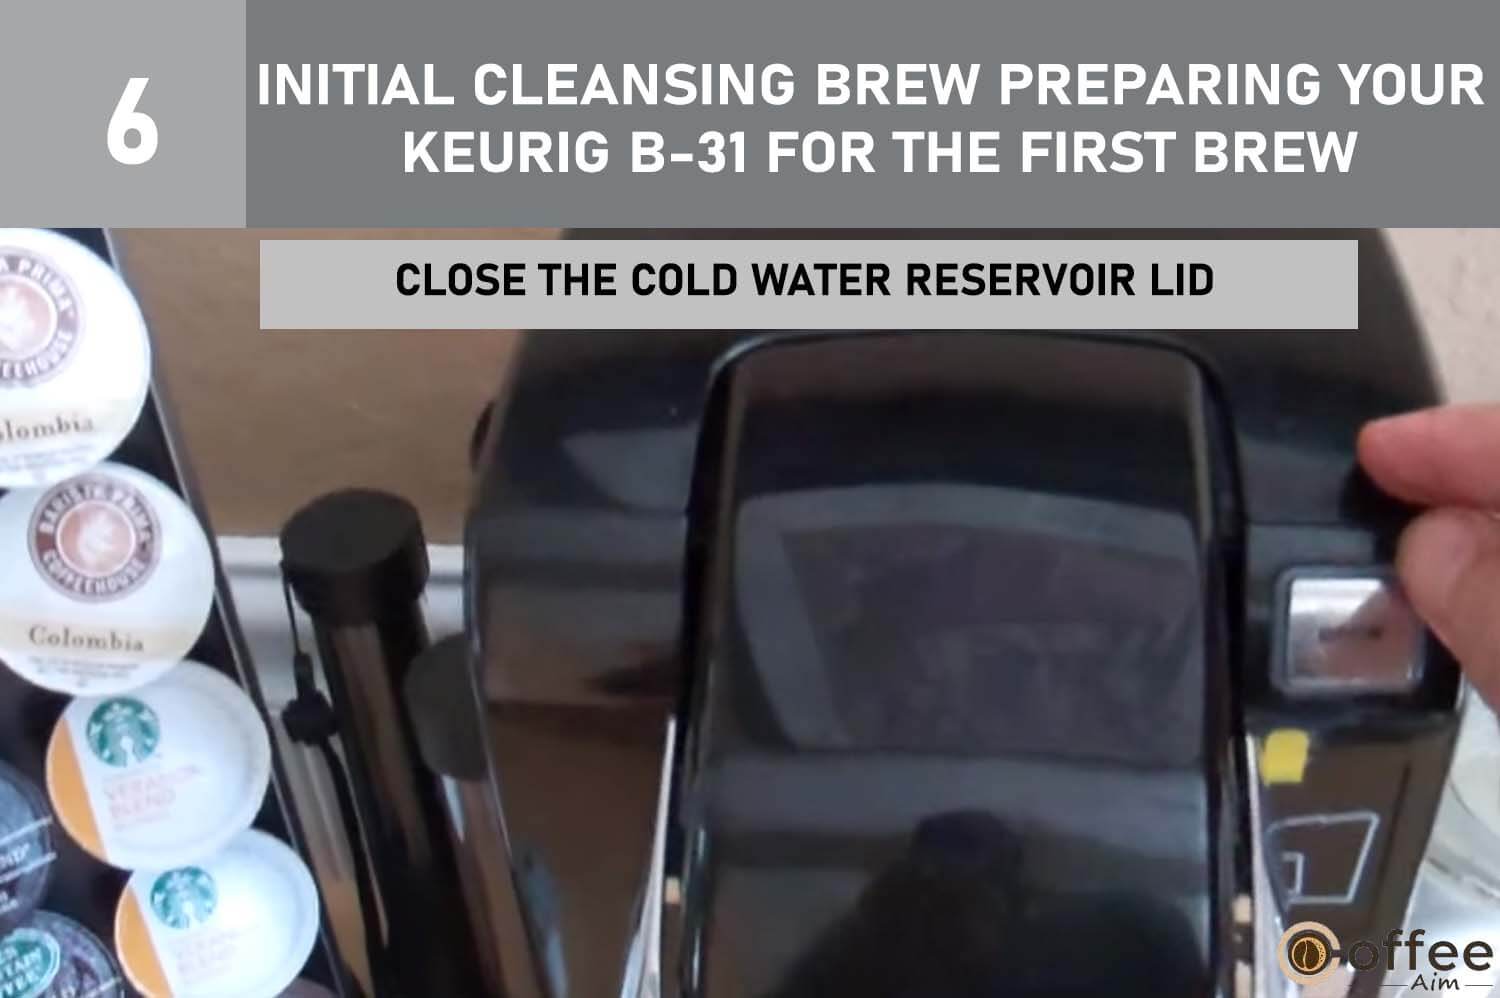 Refer to this image for the proper procedure on how to close the Cold Water Reservoir Lid during the initial cleansing brew, as part of preparing your Keurig B-31 for its first brew.